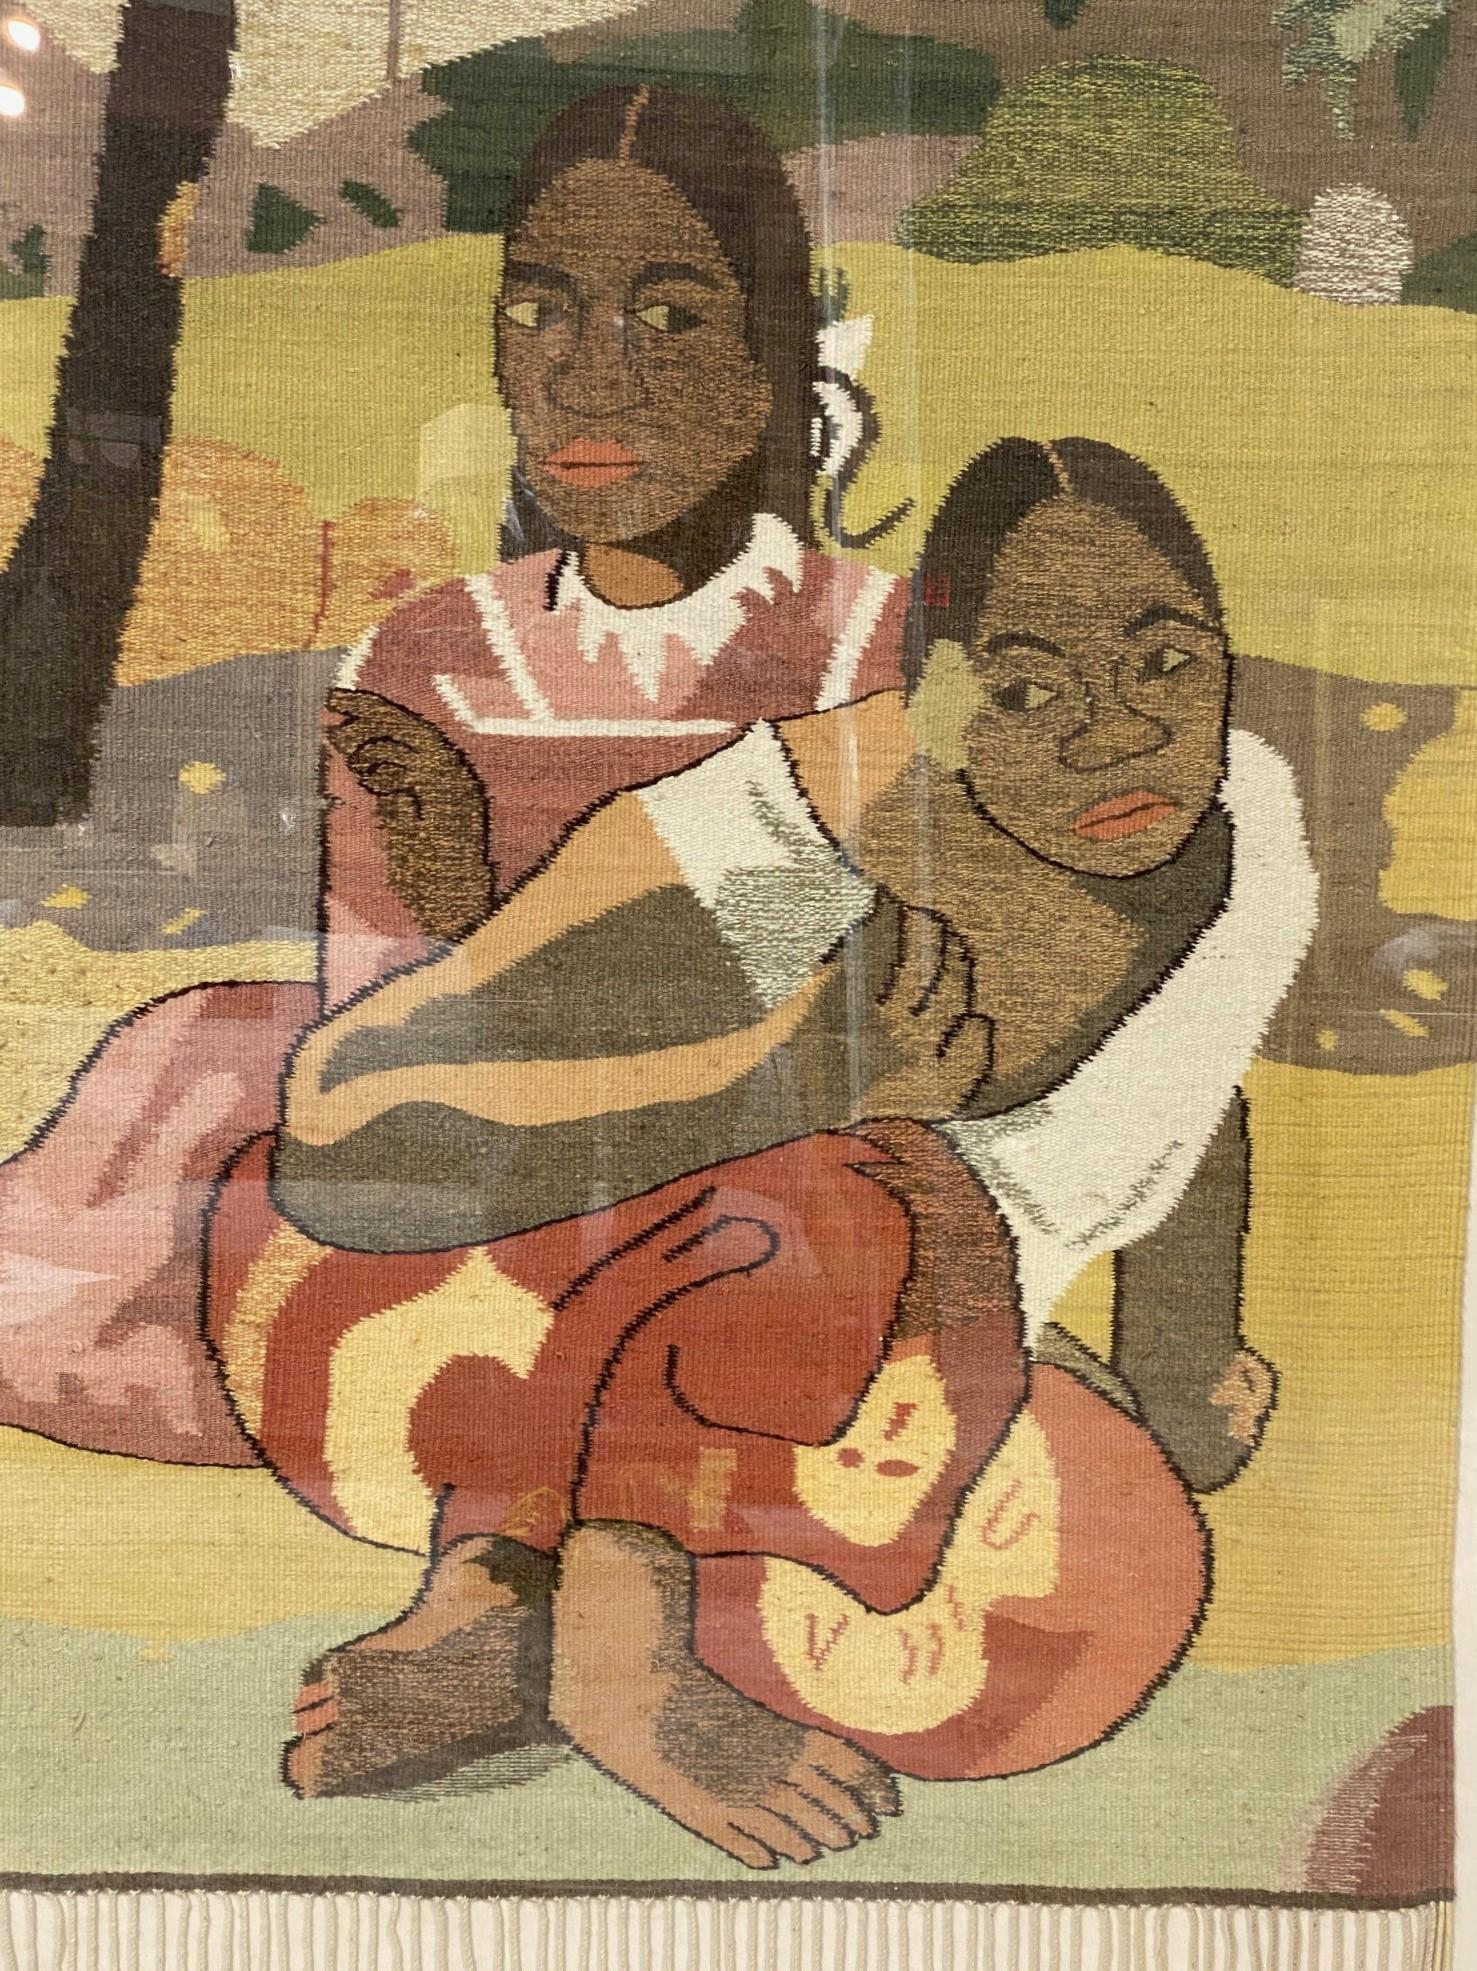 Hand-Crafted Large Framed Midcentury Pictorial Weaving Tapestry in the Style of Paul Gauguin